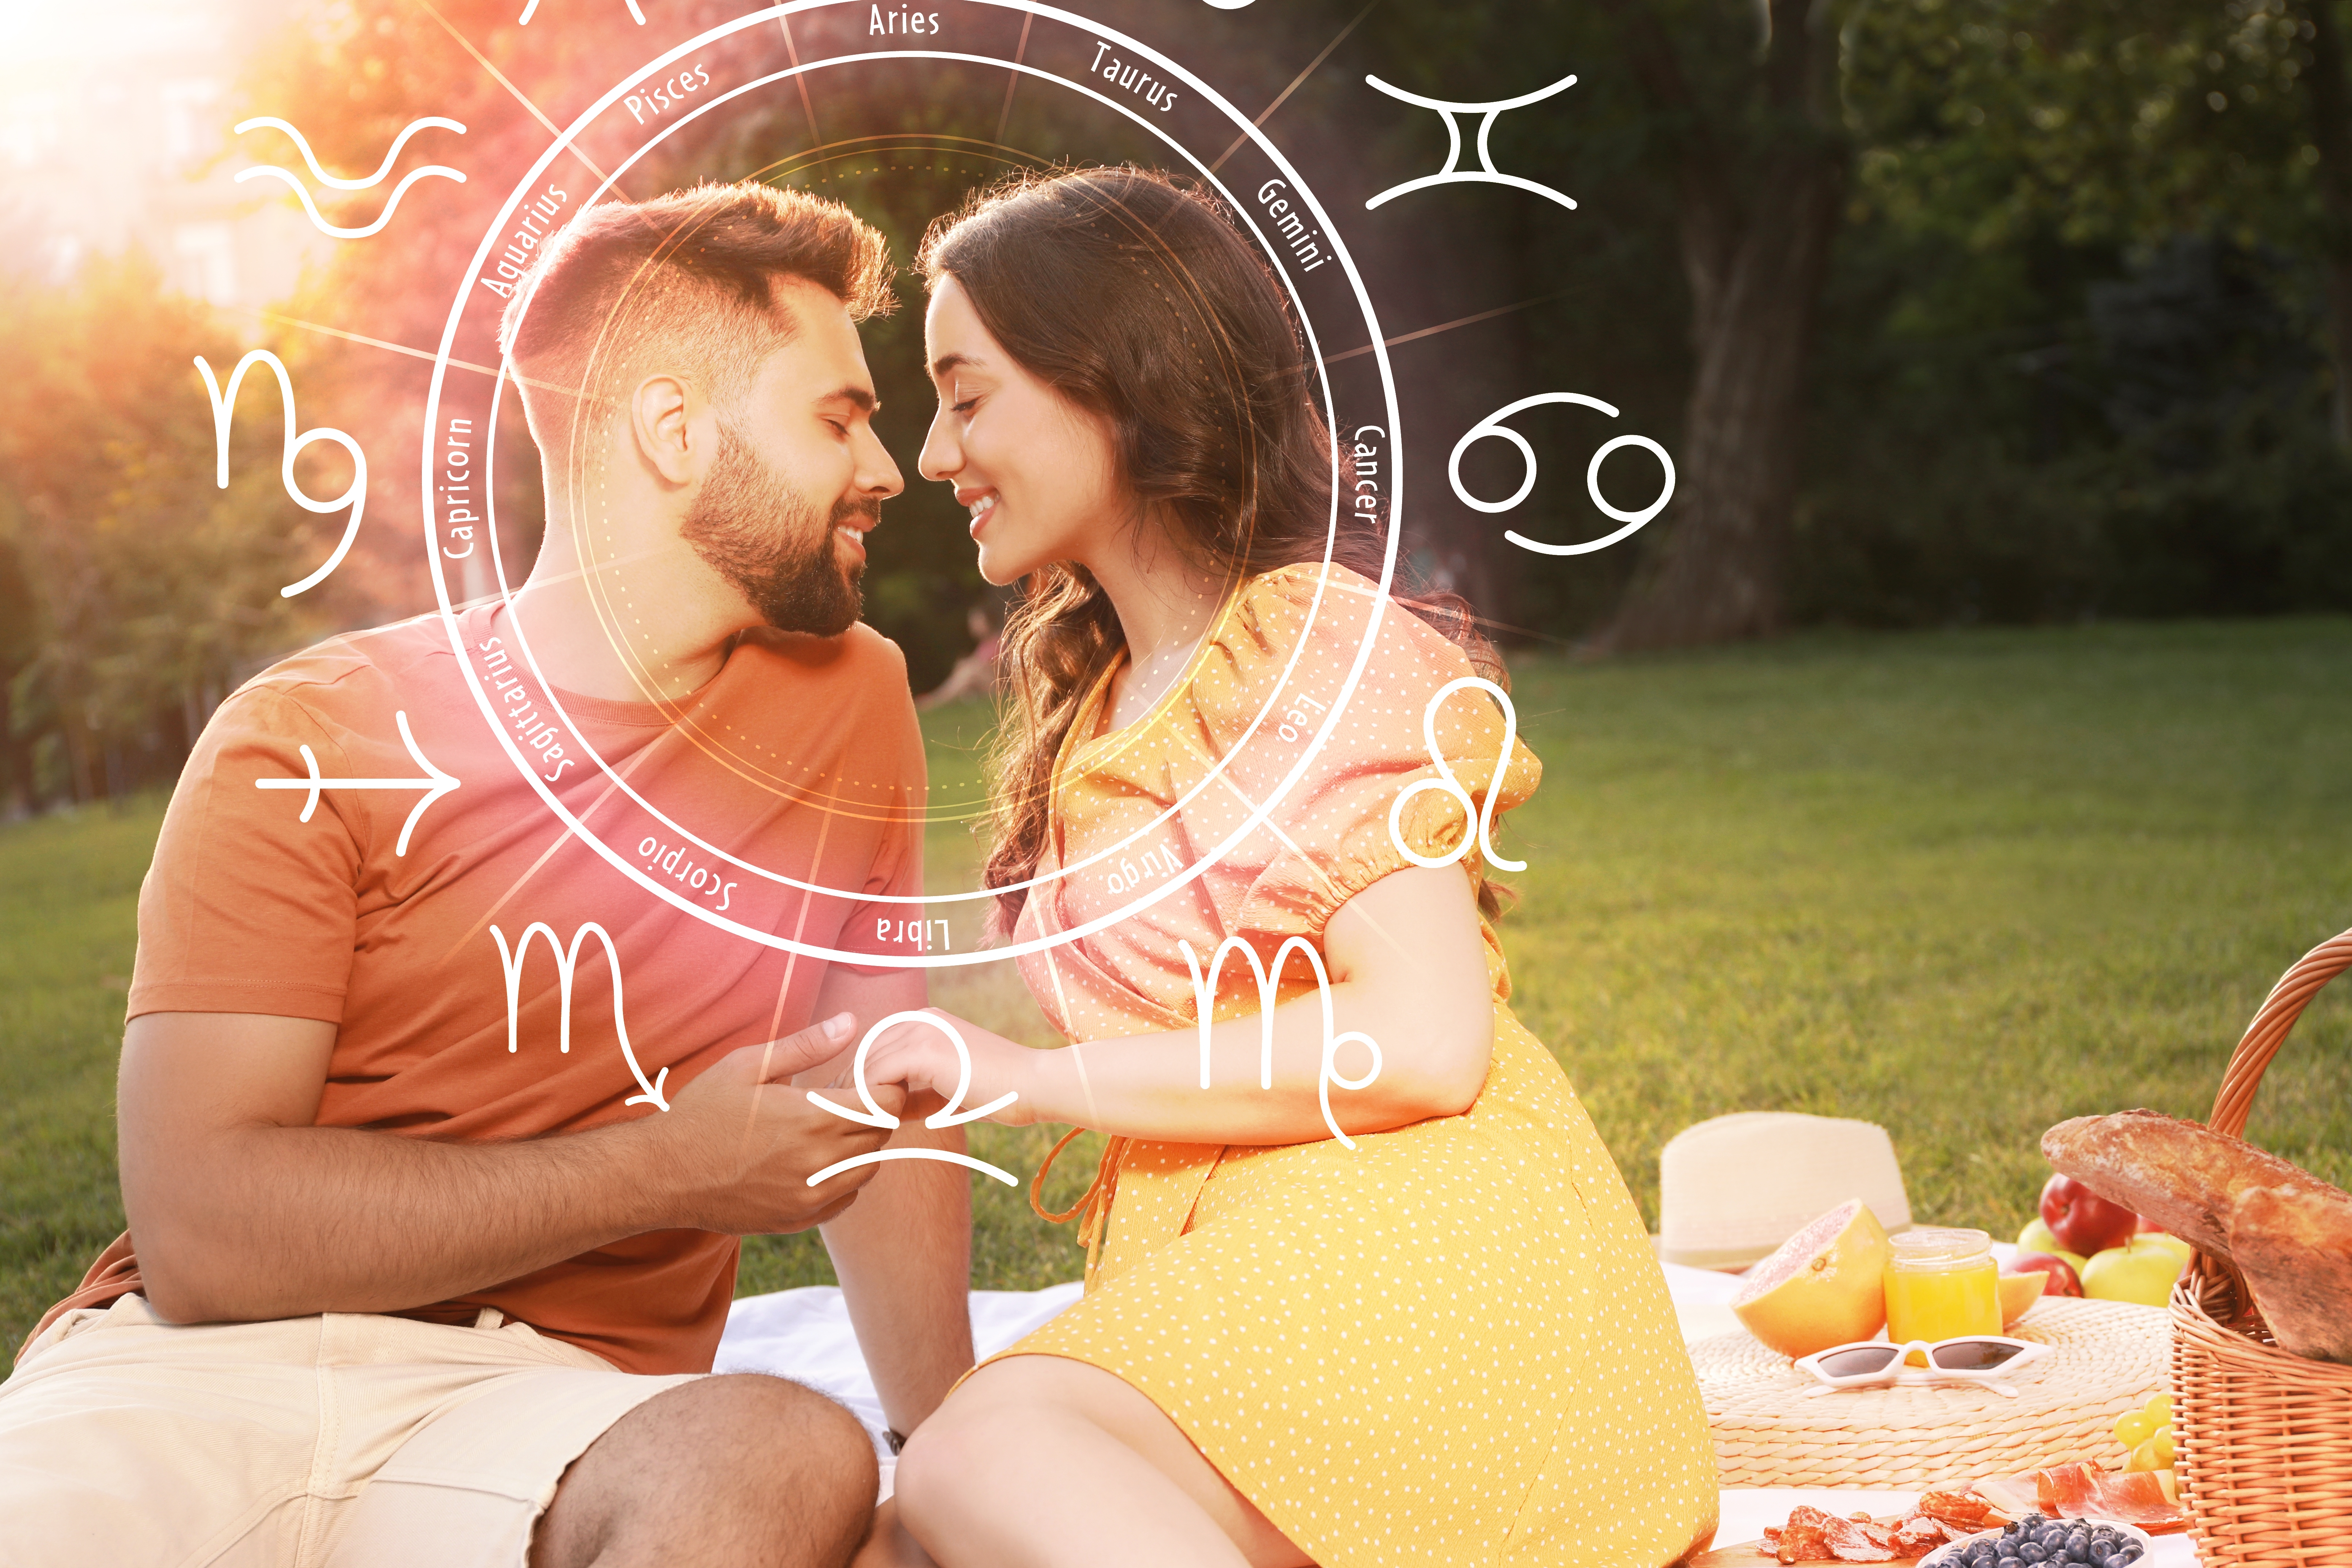 A photo of a loving couple outdoor and zodiac wheel | Source: Shutterstock